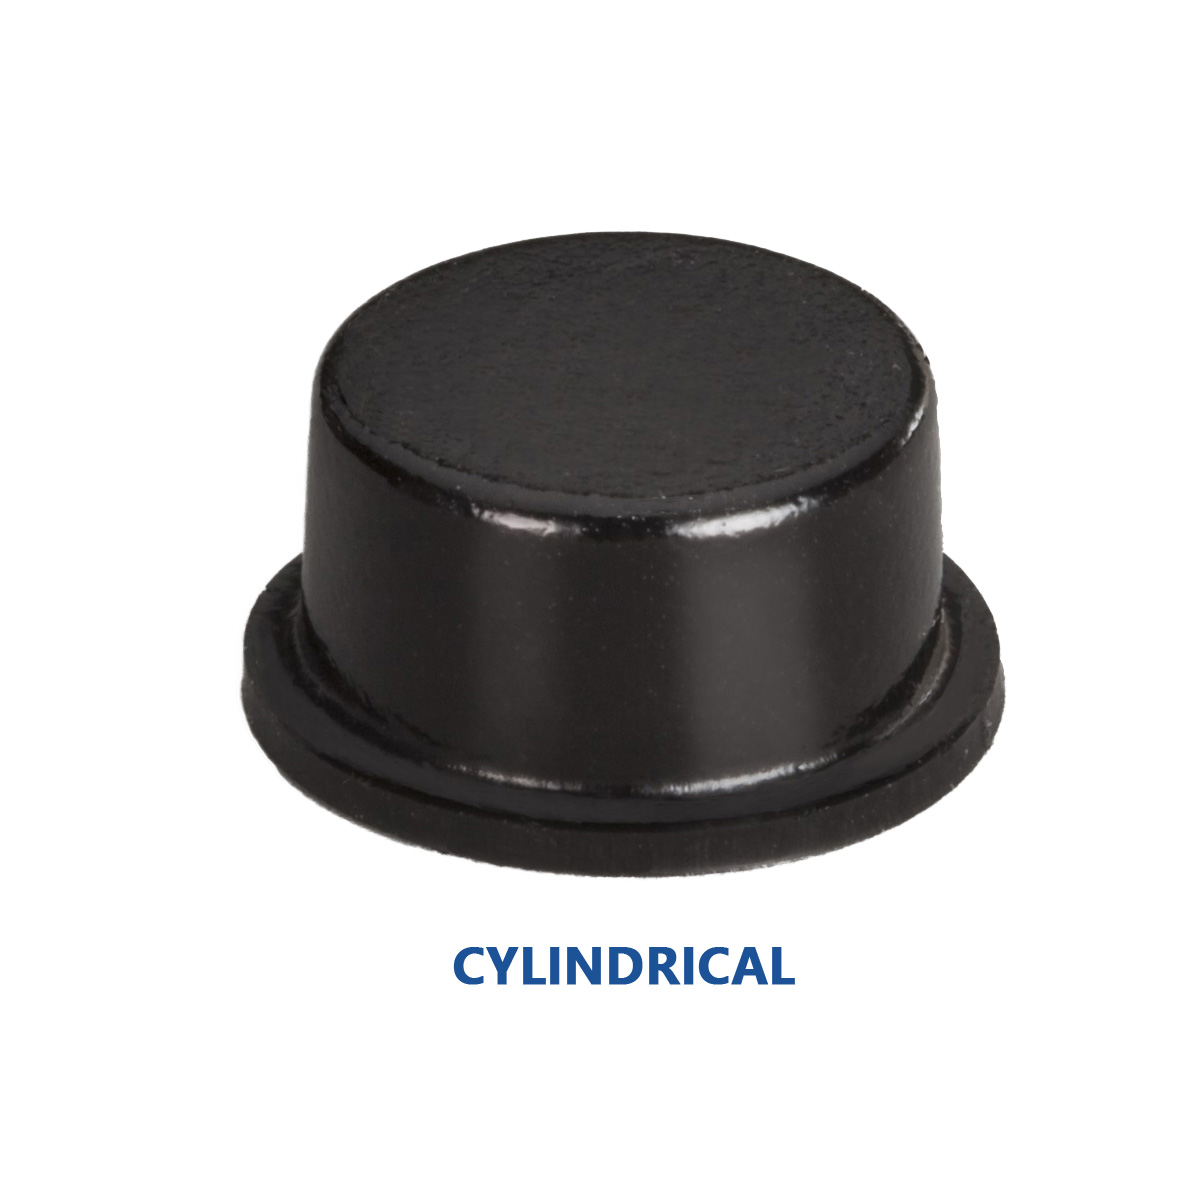 Cylindrical 3M self adhesive rubber bumpers